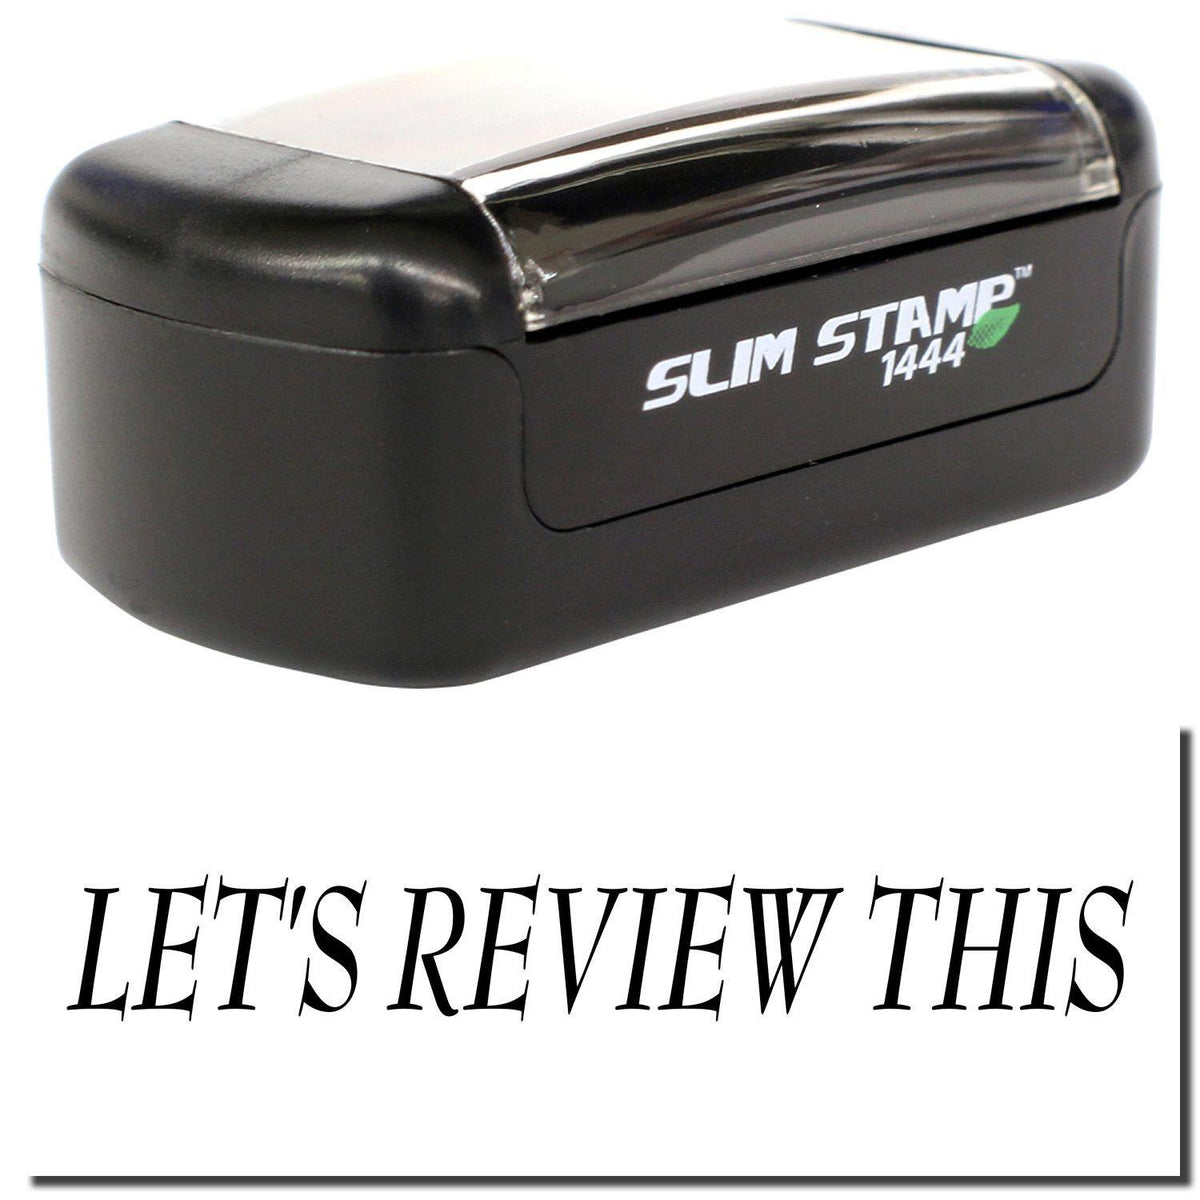 A stock office pre-inked stamp with a stamped image showing how the text &quot;LET&#39;S REVIEW THIS&quot; is displayed after stamping.